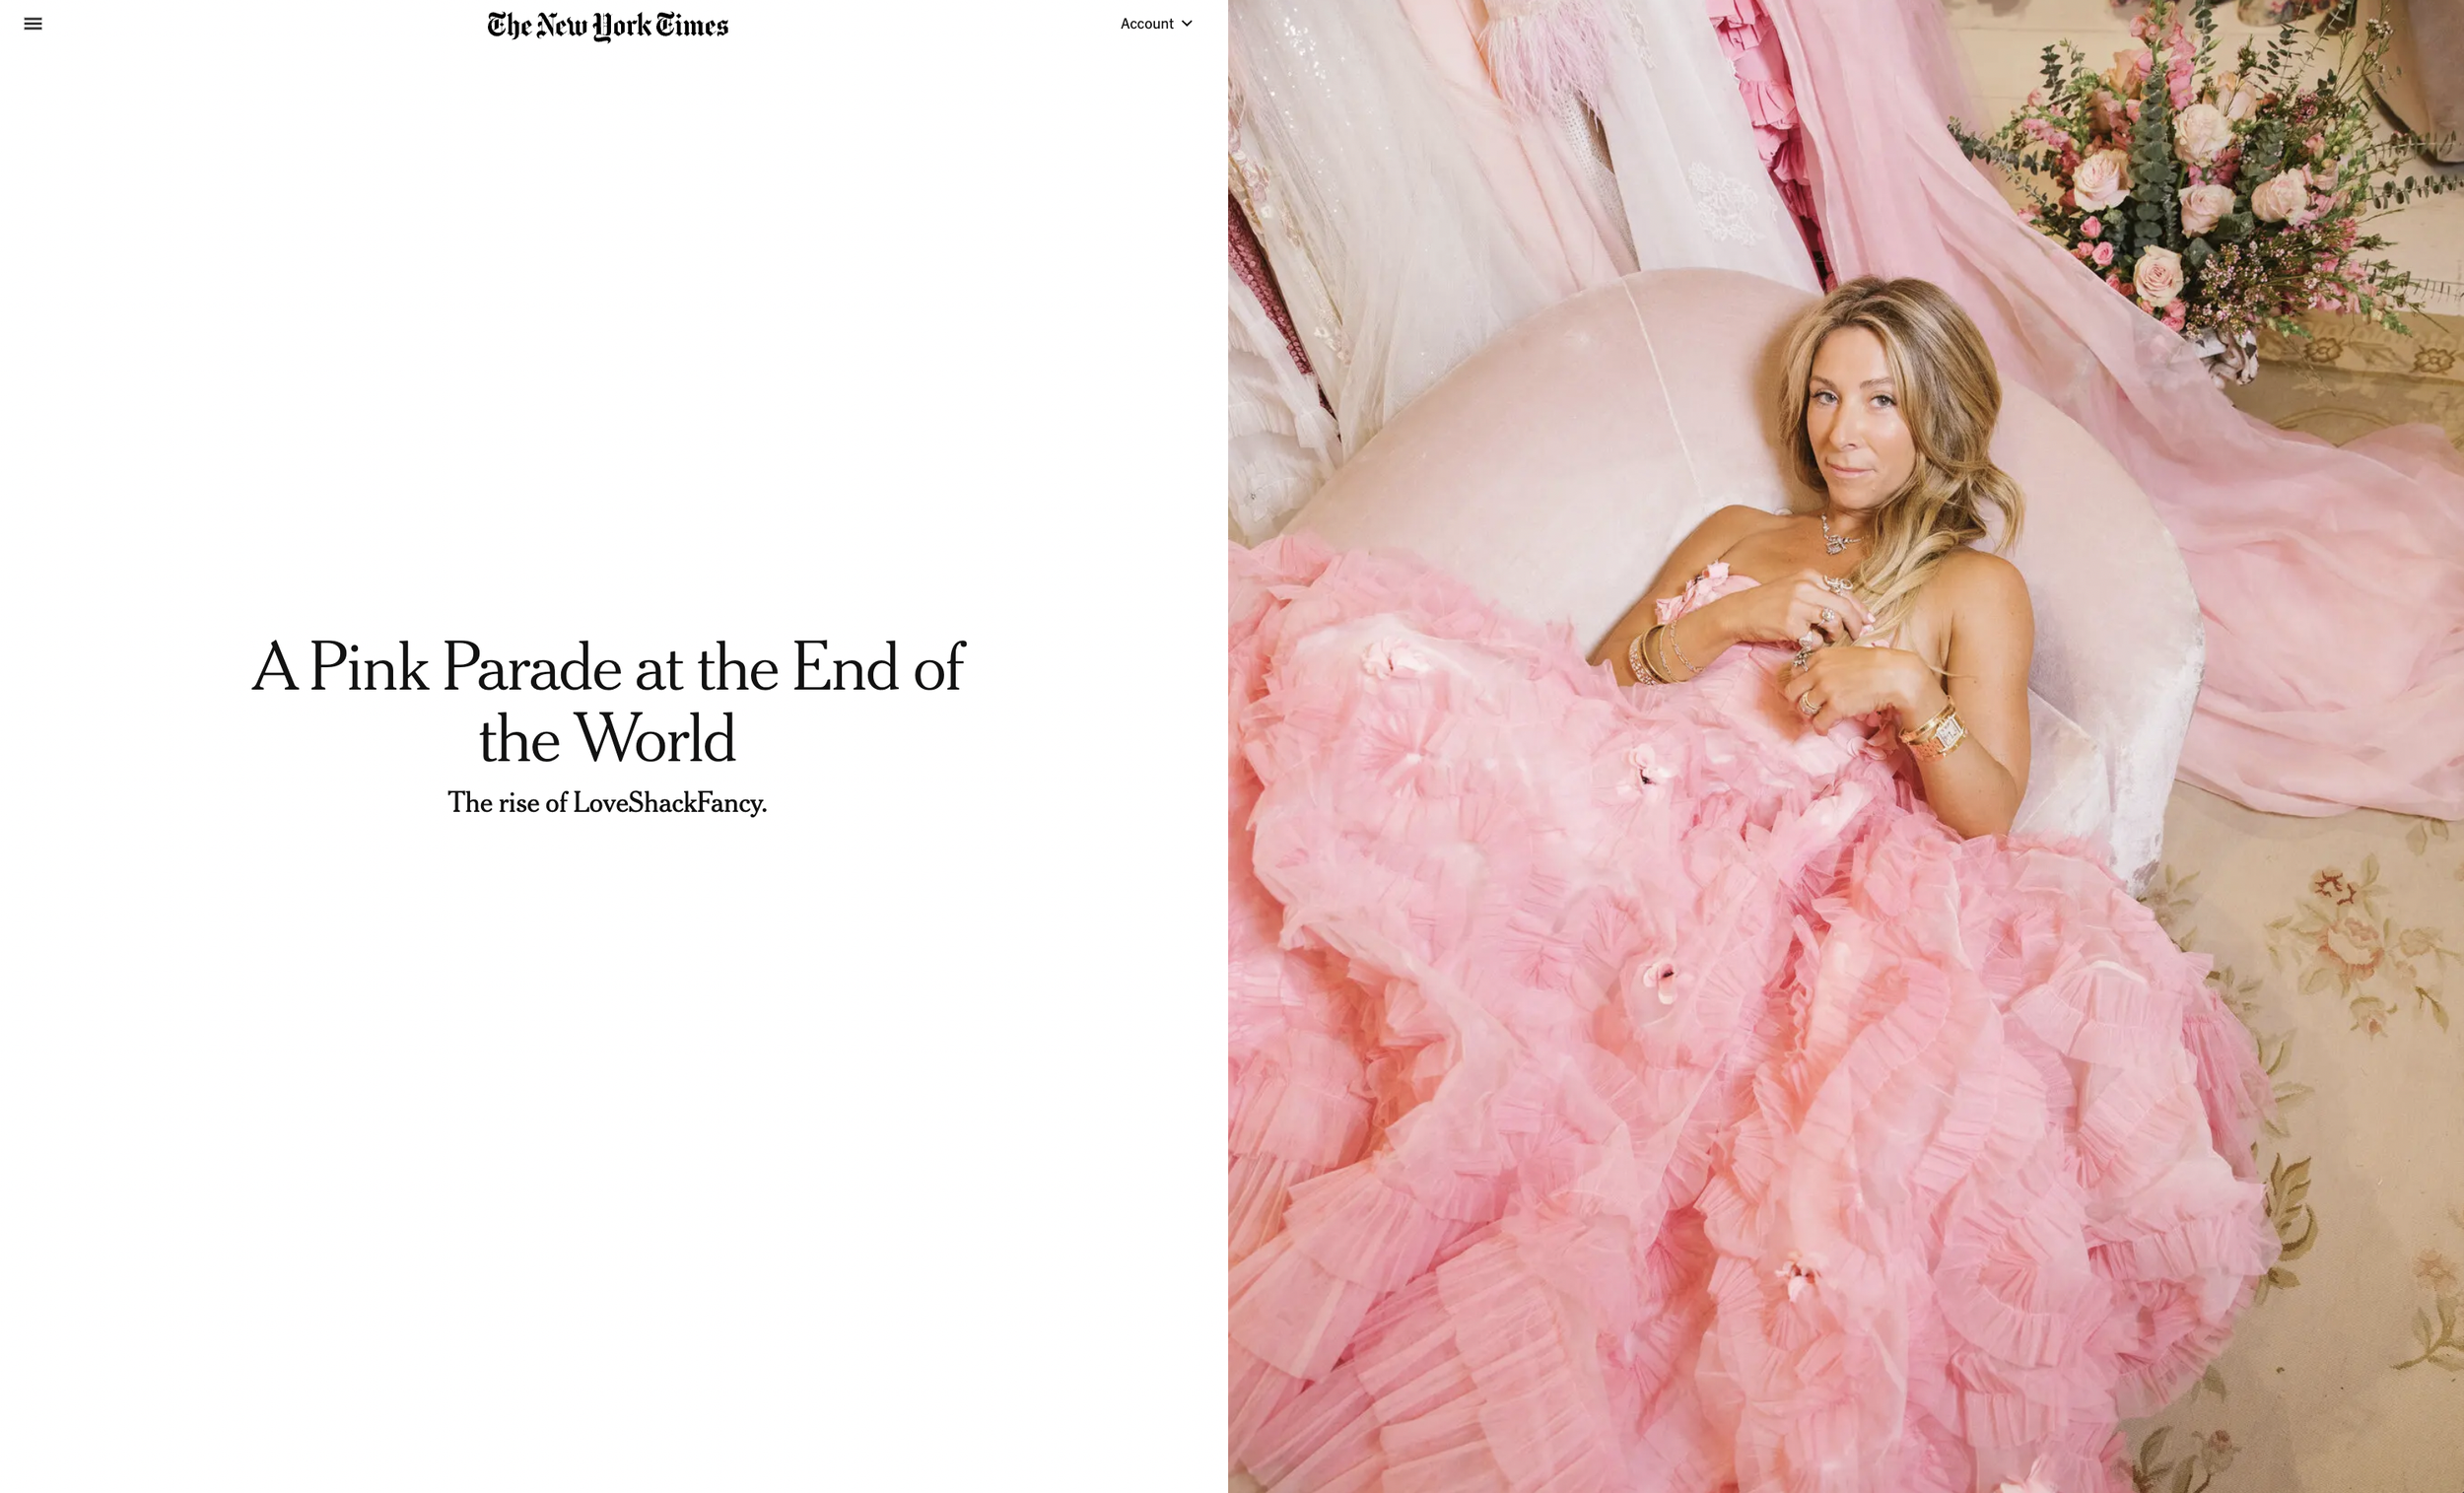 A Pink Parade at the End of the World - The New York Times